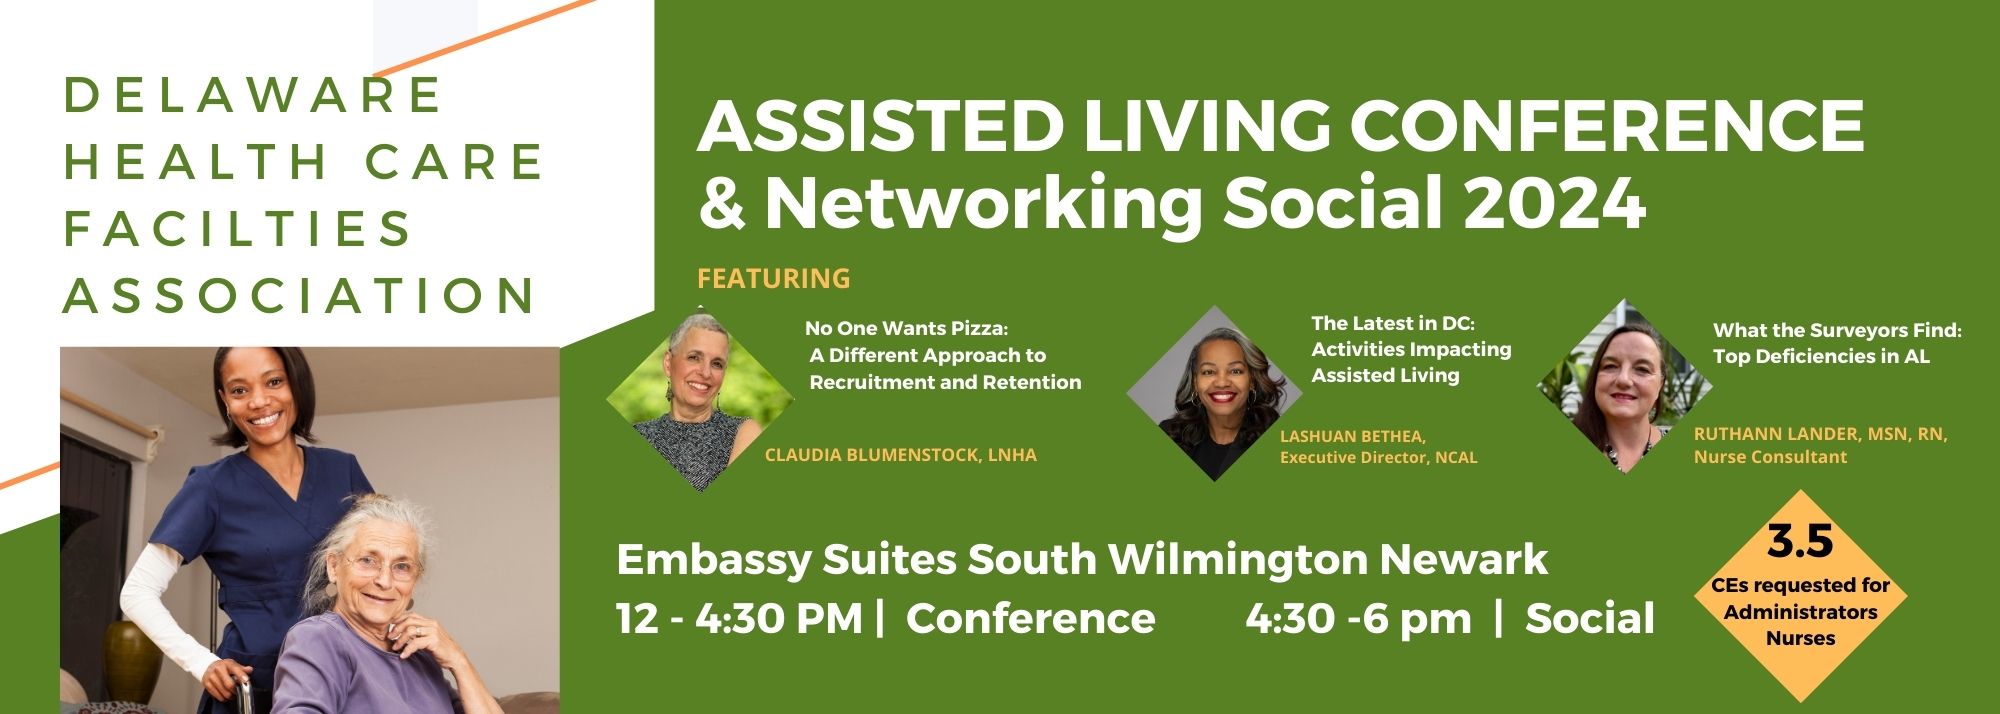 Assisted Living Conference 2024